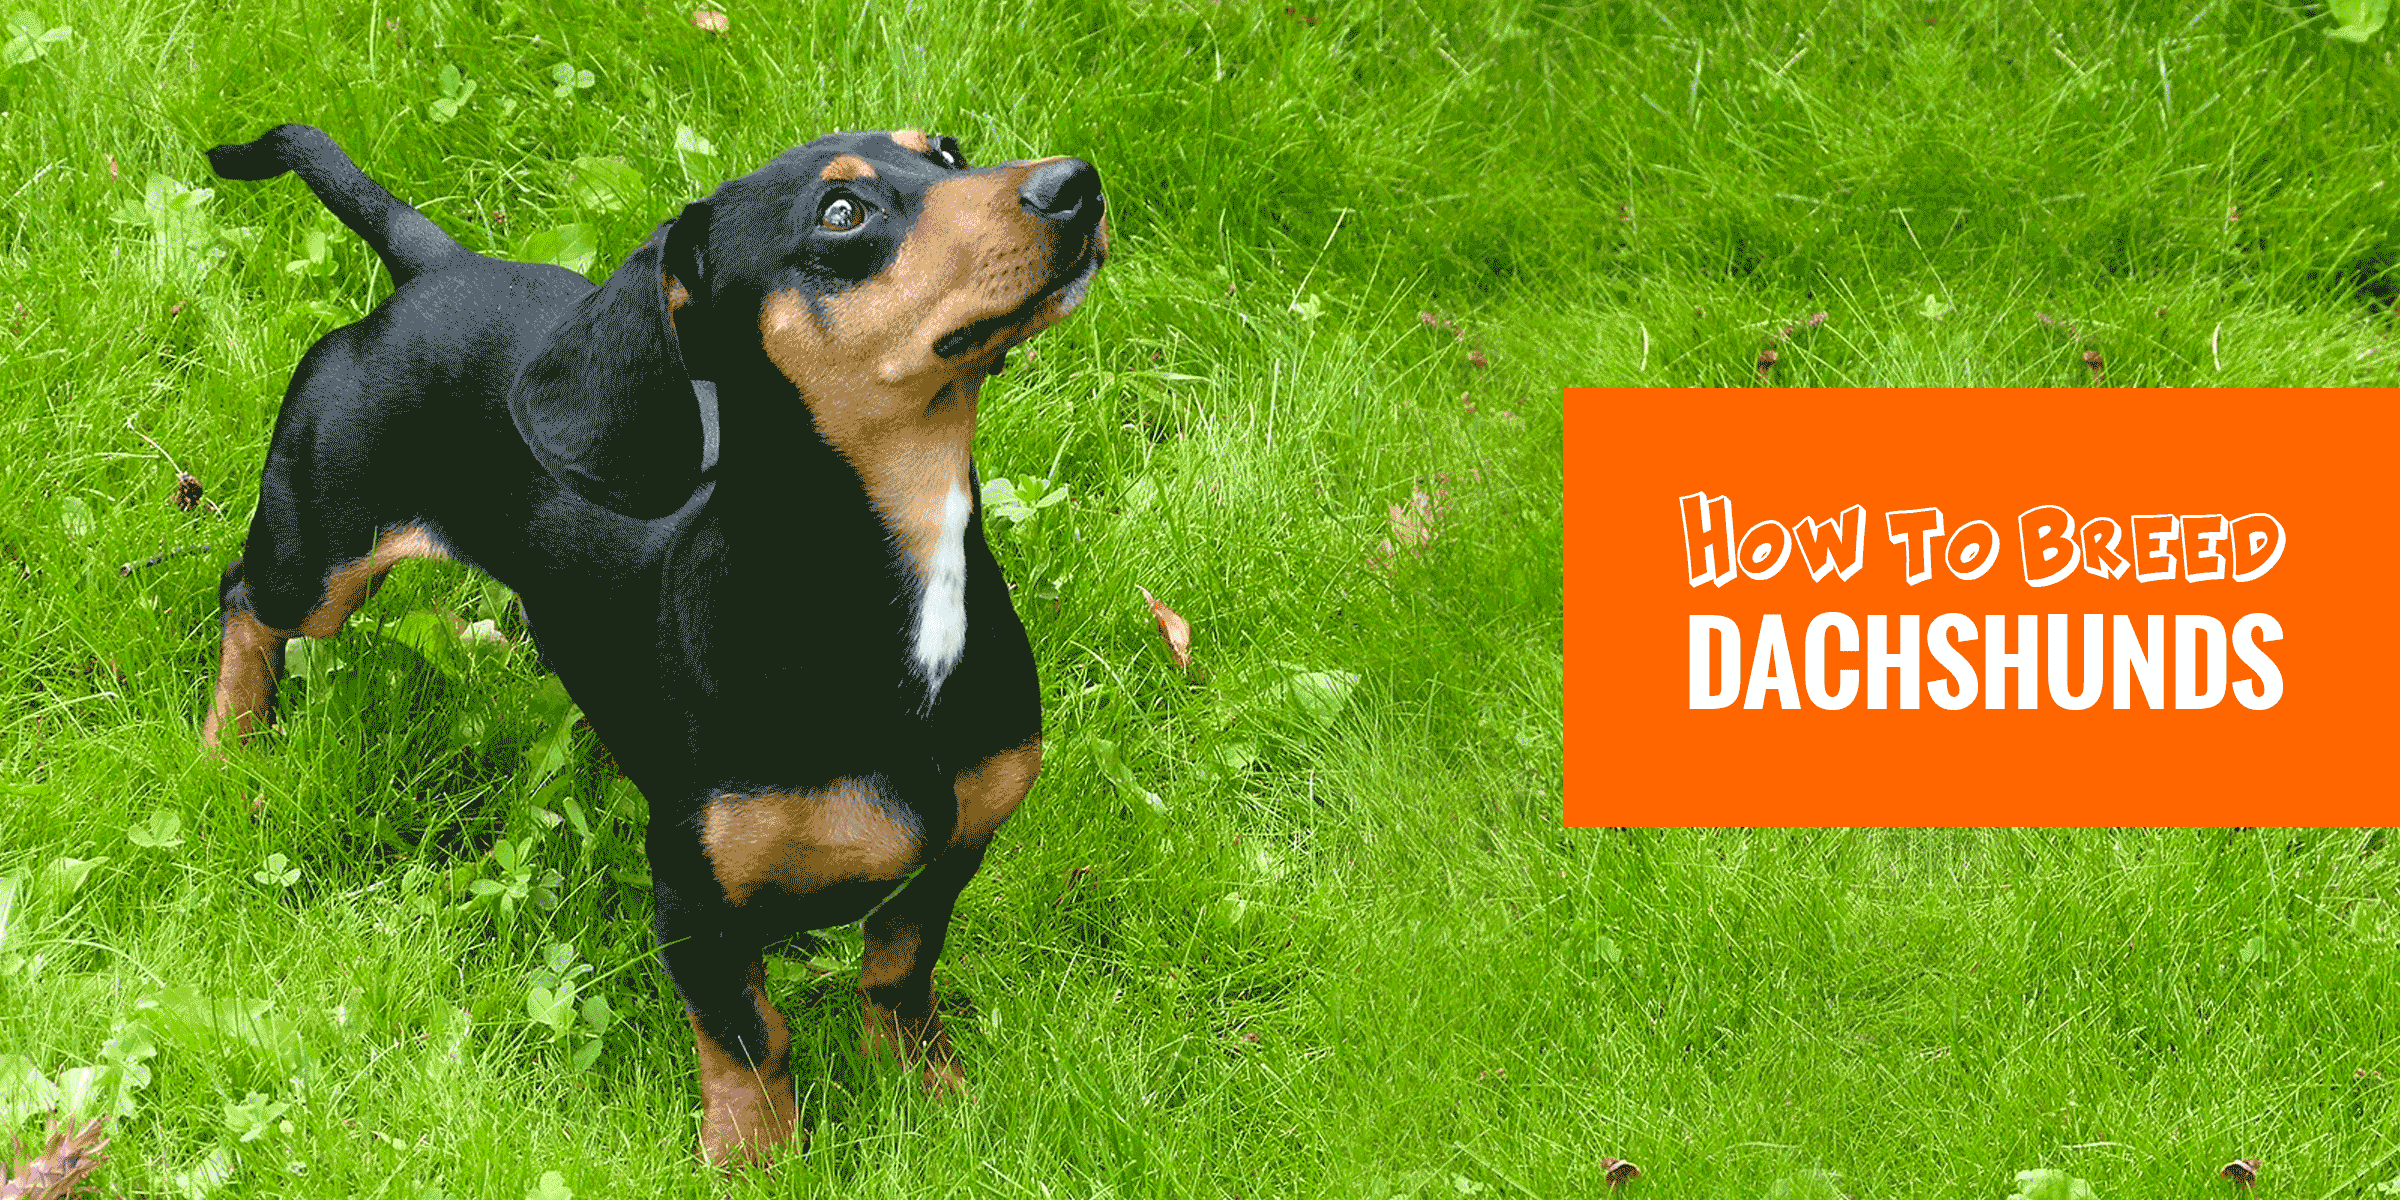 Guide to Breeding Dachshunds